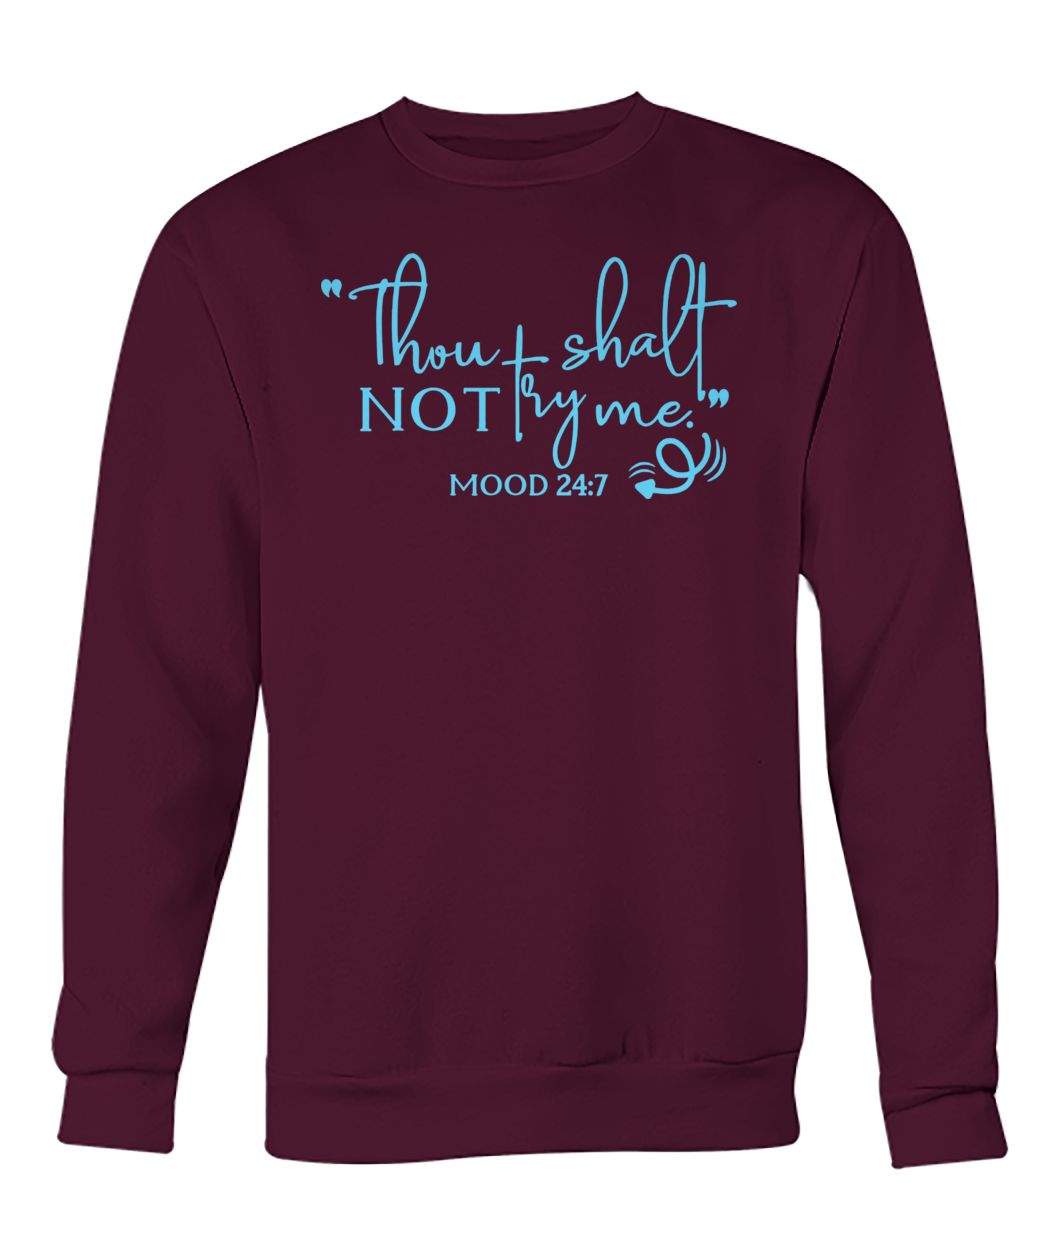 Thou shall not try me mood 24-7 mother's day crew neck sweatshirt